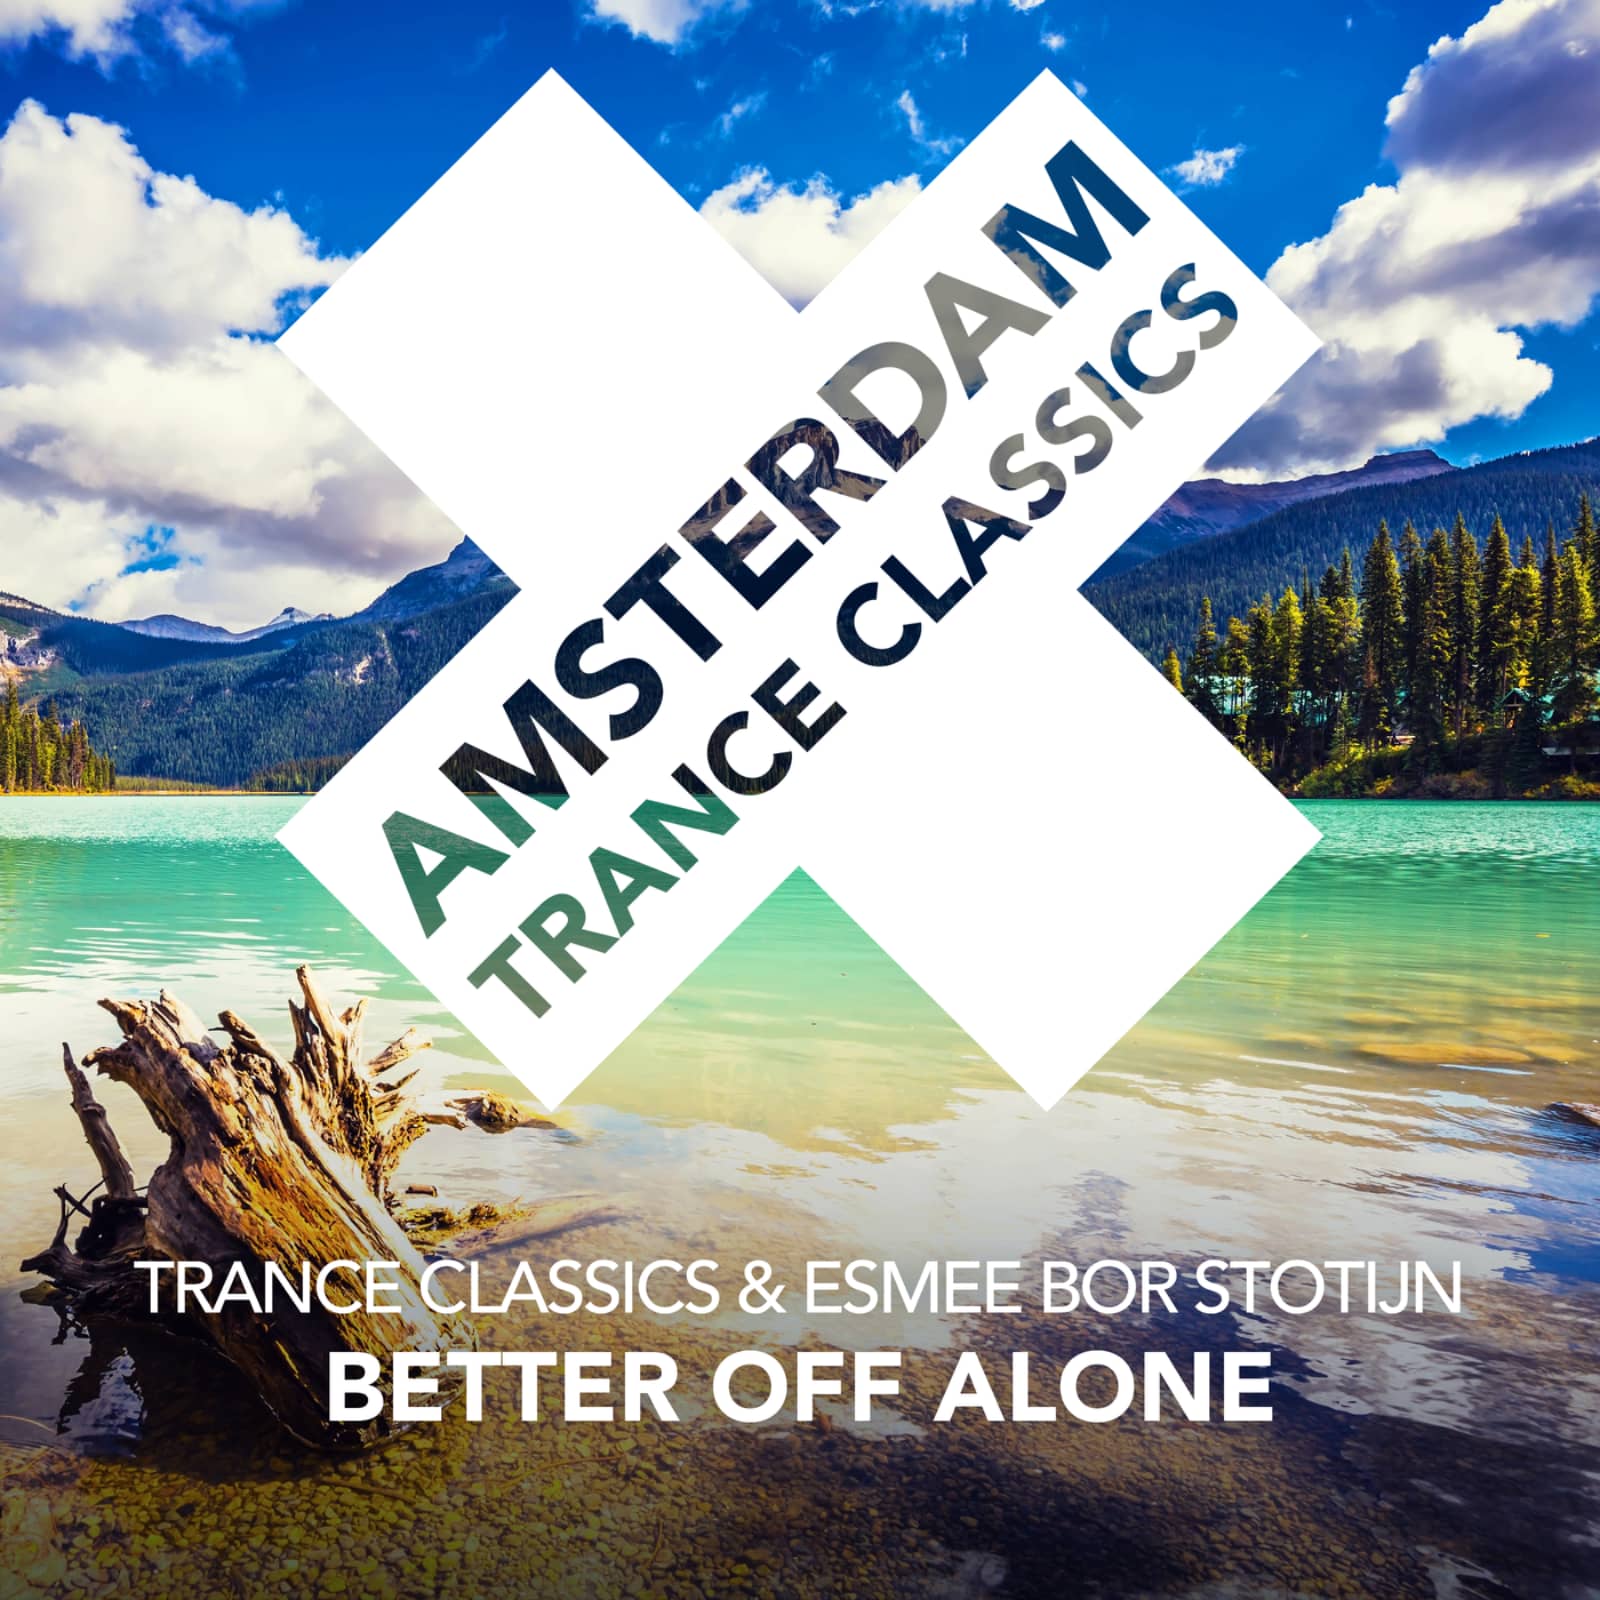 Better off alone x. Esmee bor Stotijn. Better off Alone. Trance Classic 2019. Alice Deejay better off Alone обложка.